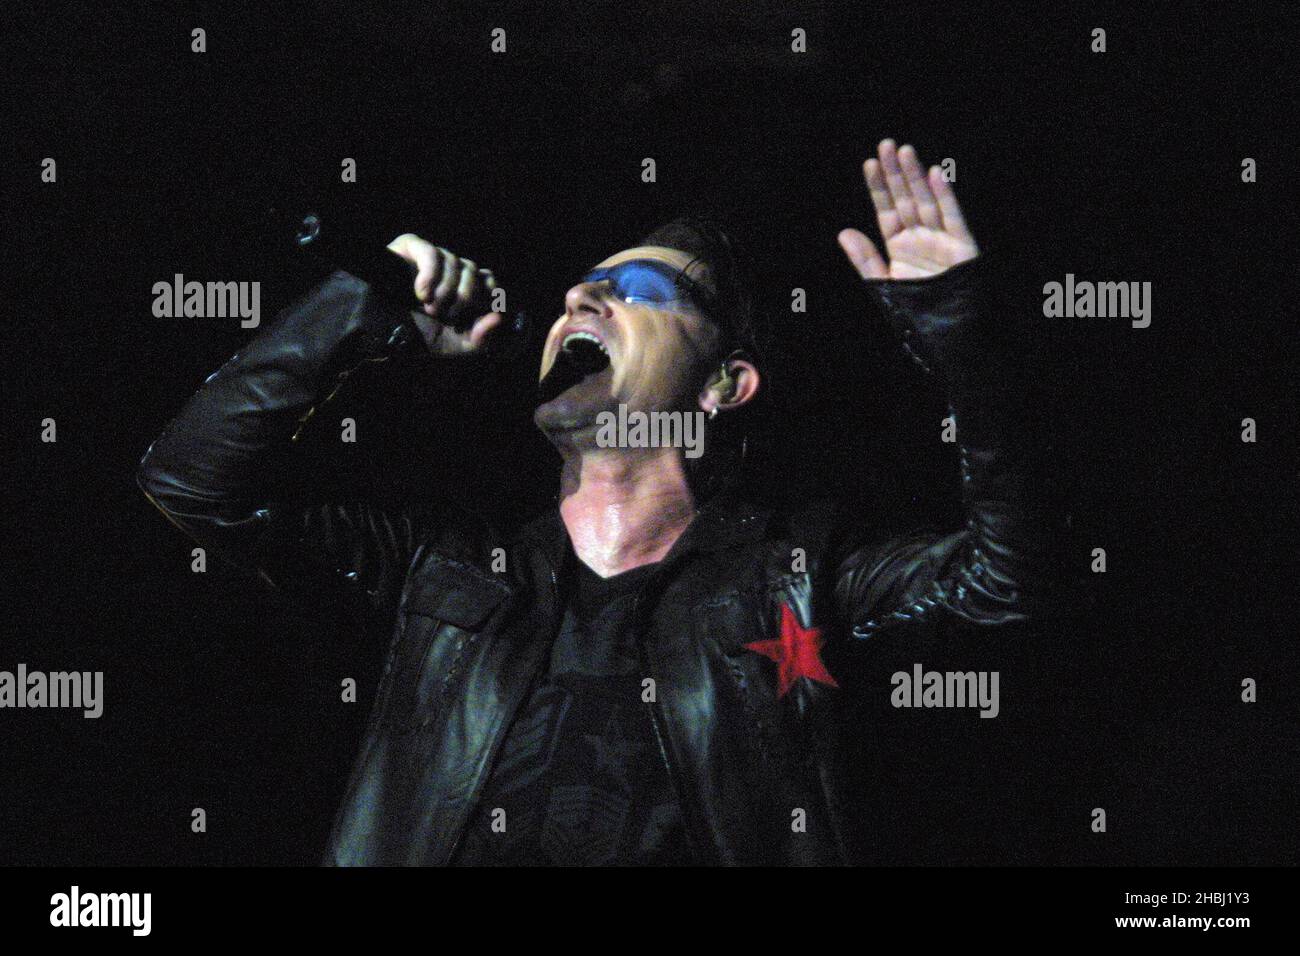 U2, Bono in concert at the Madison Square Garden, New York. Live. Half Length. Blue tinted sunglasses. Stock Photo